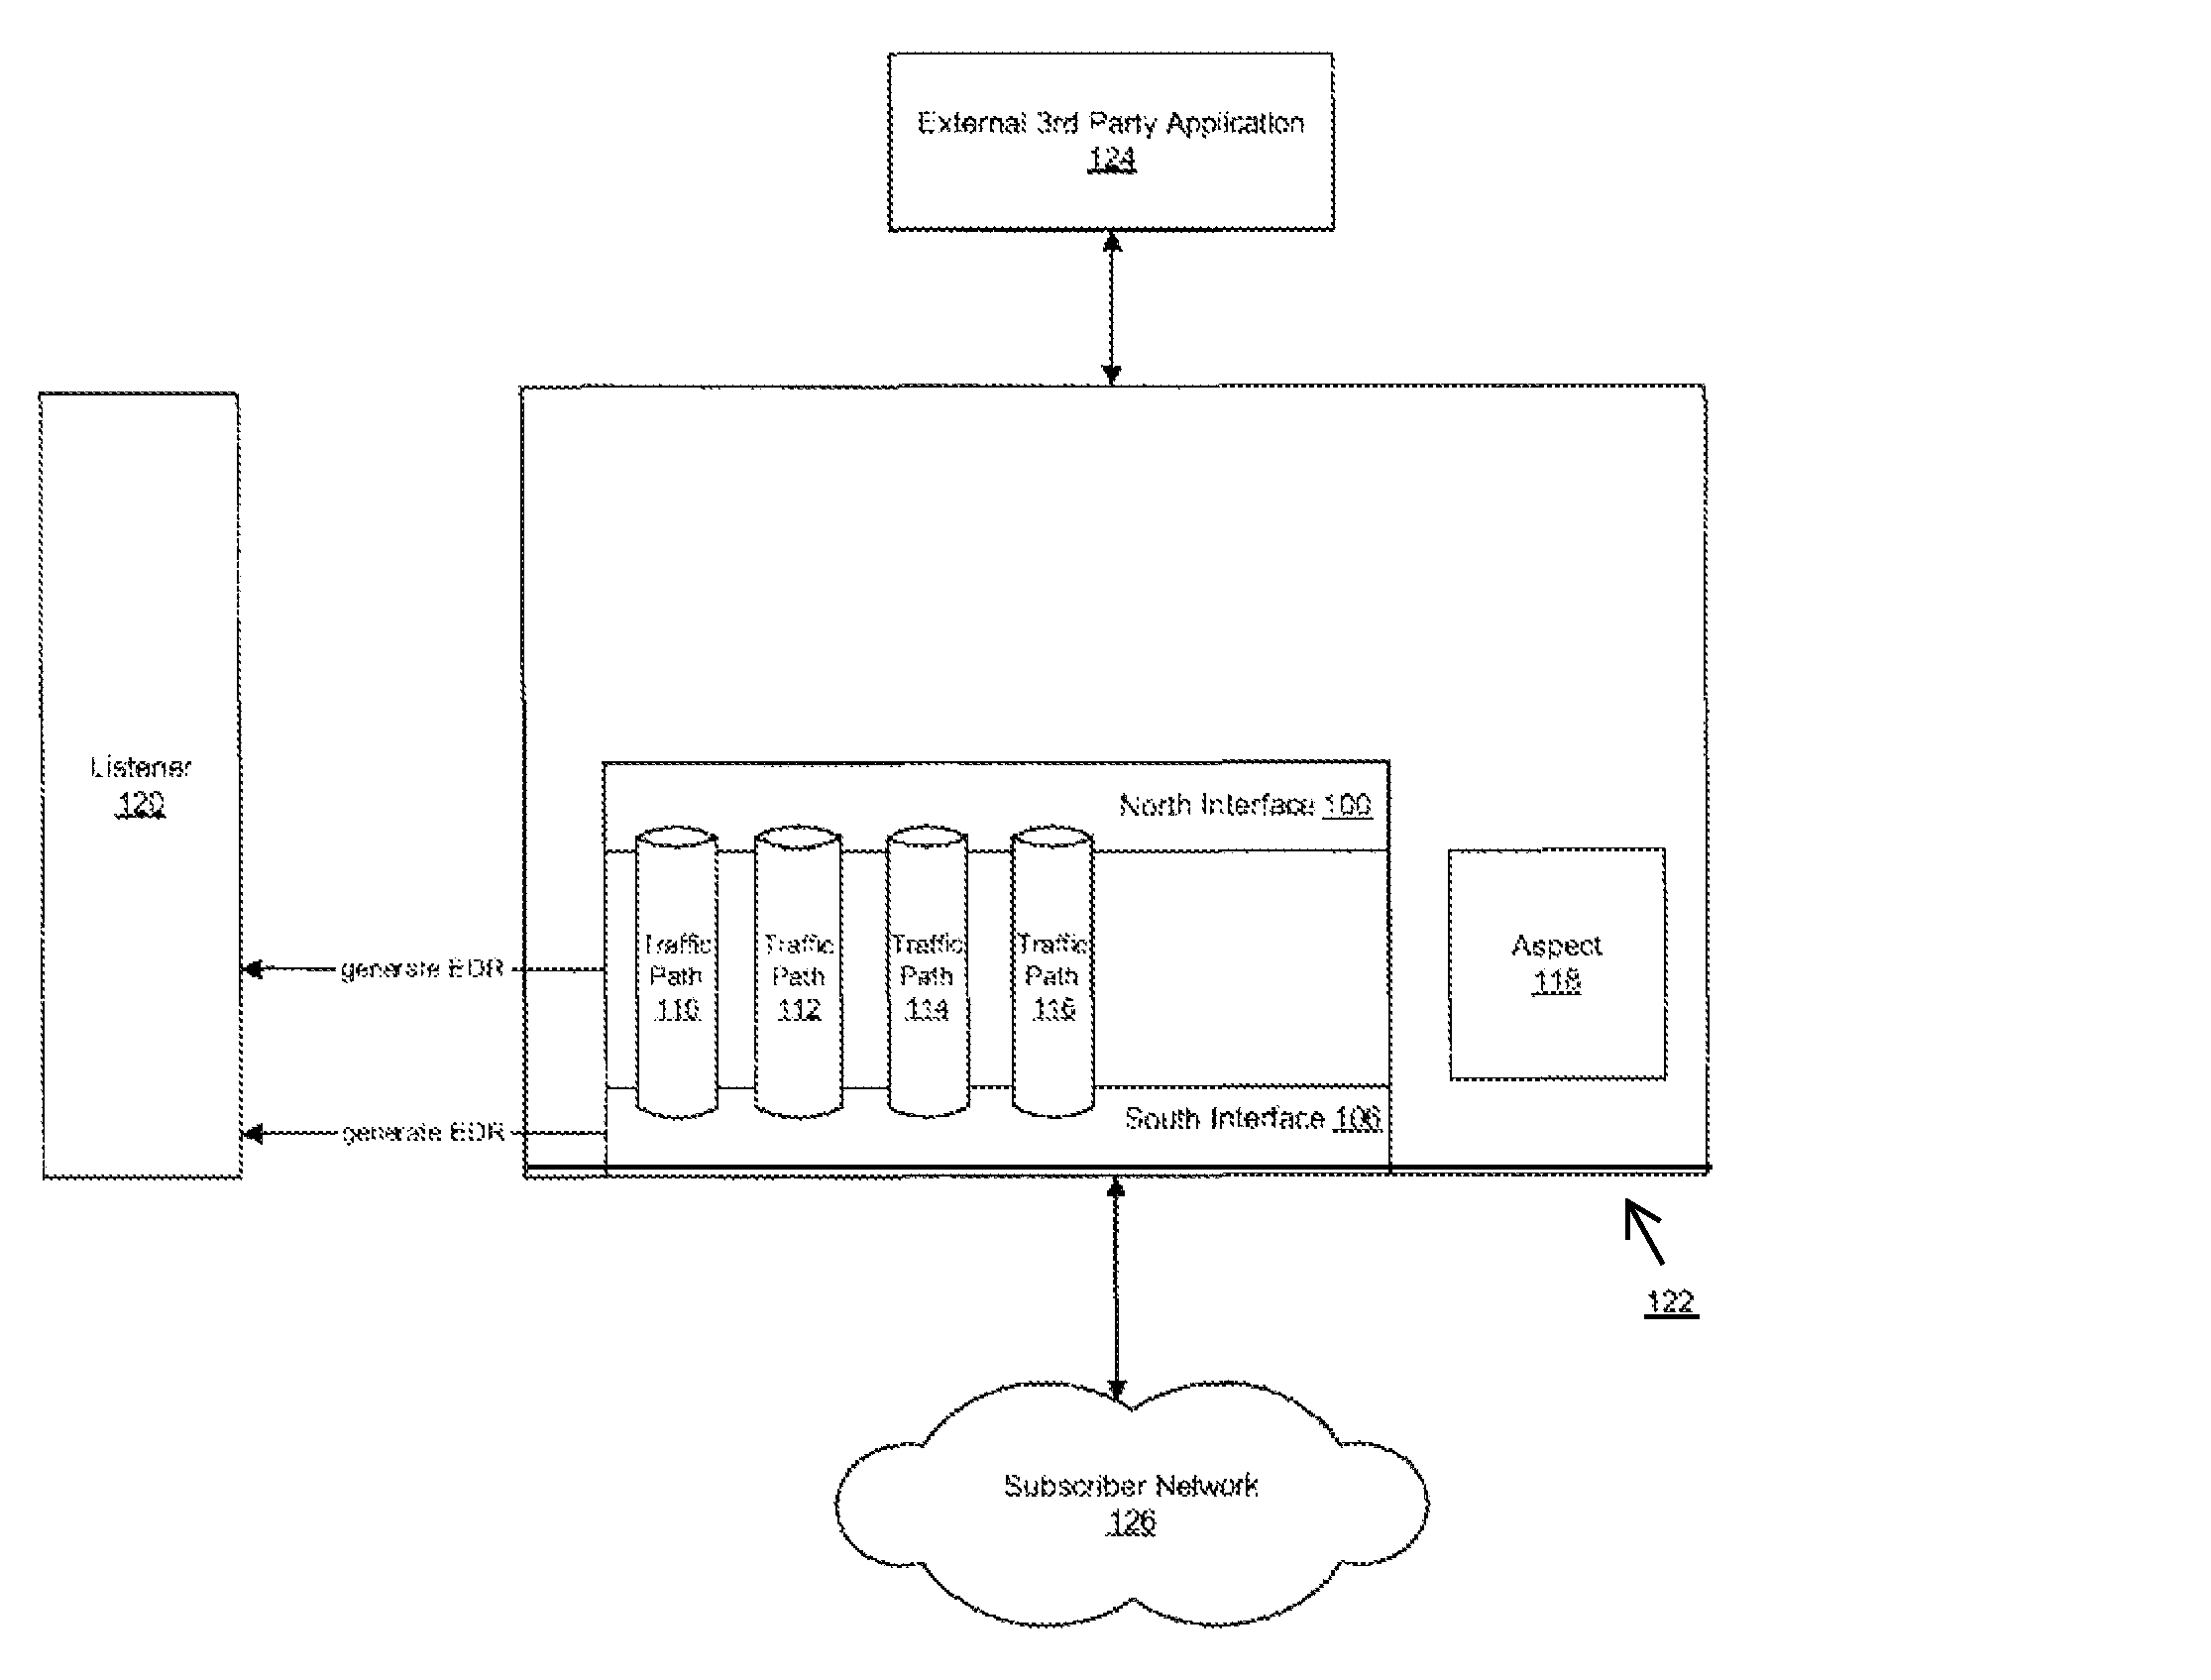 System and method for using aspects to generate event data records